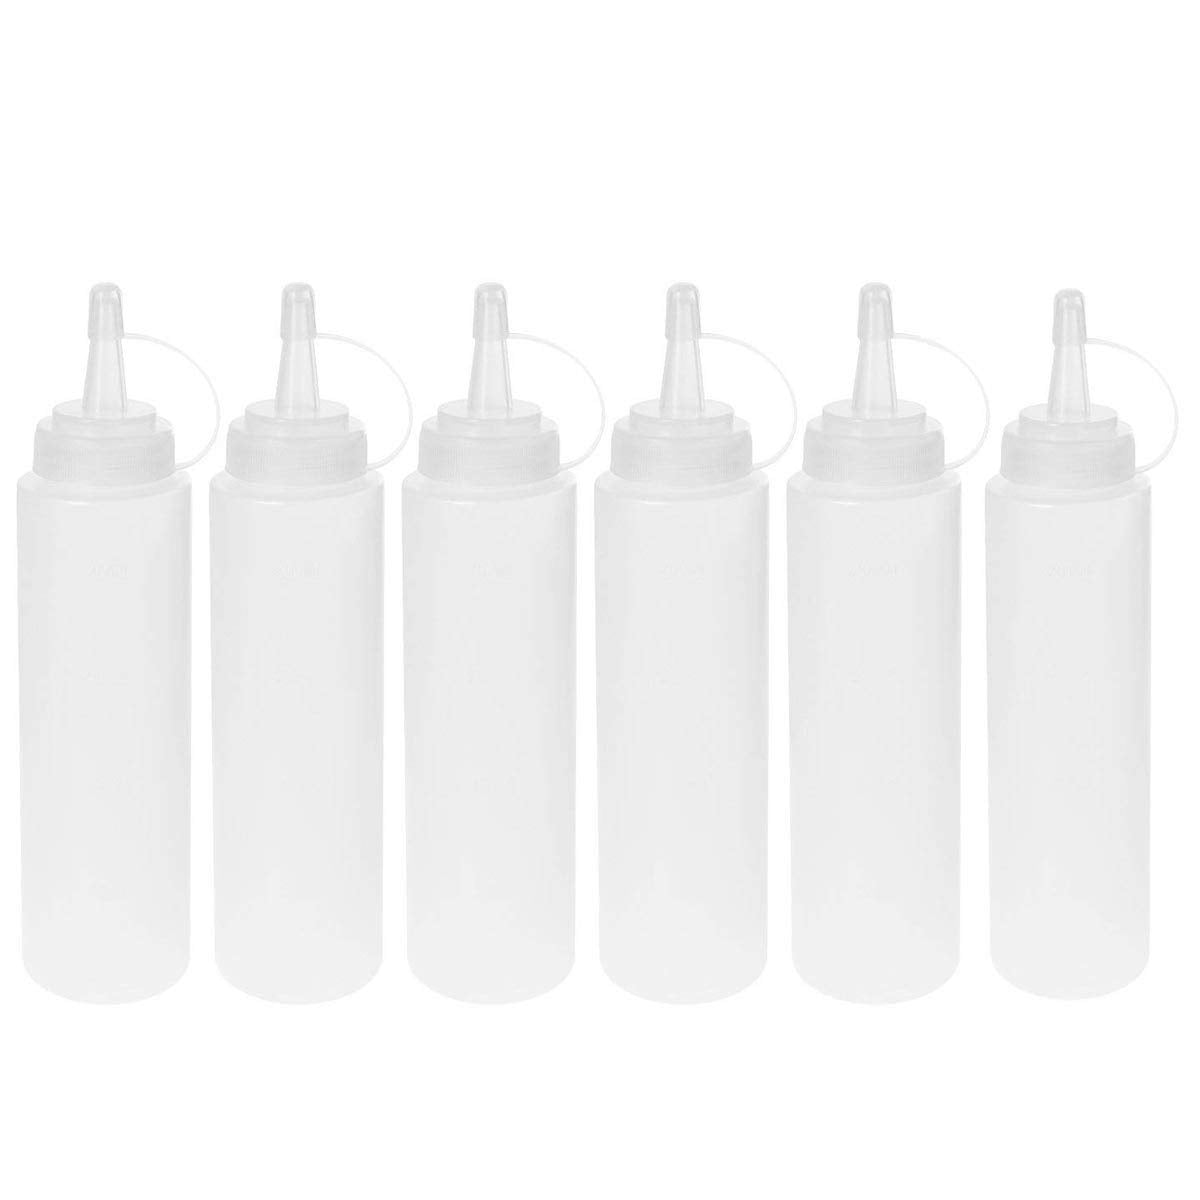 Lainrrew 4 Pcs 8 oz Plastic Squeeze Bottles Arts and Crafts Multipurpose Squirt Condiment Bottles with Caps & Measurements for Ketchup Sauce Dressing